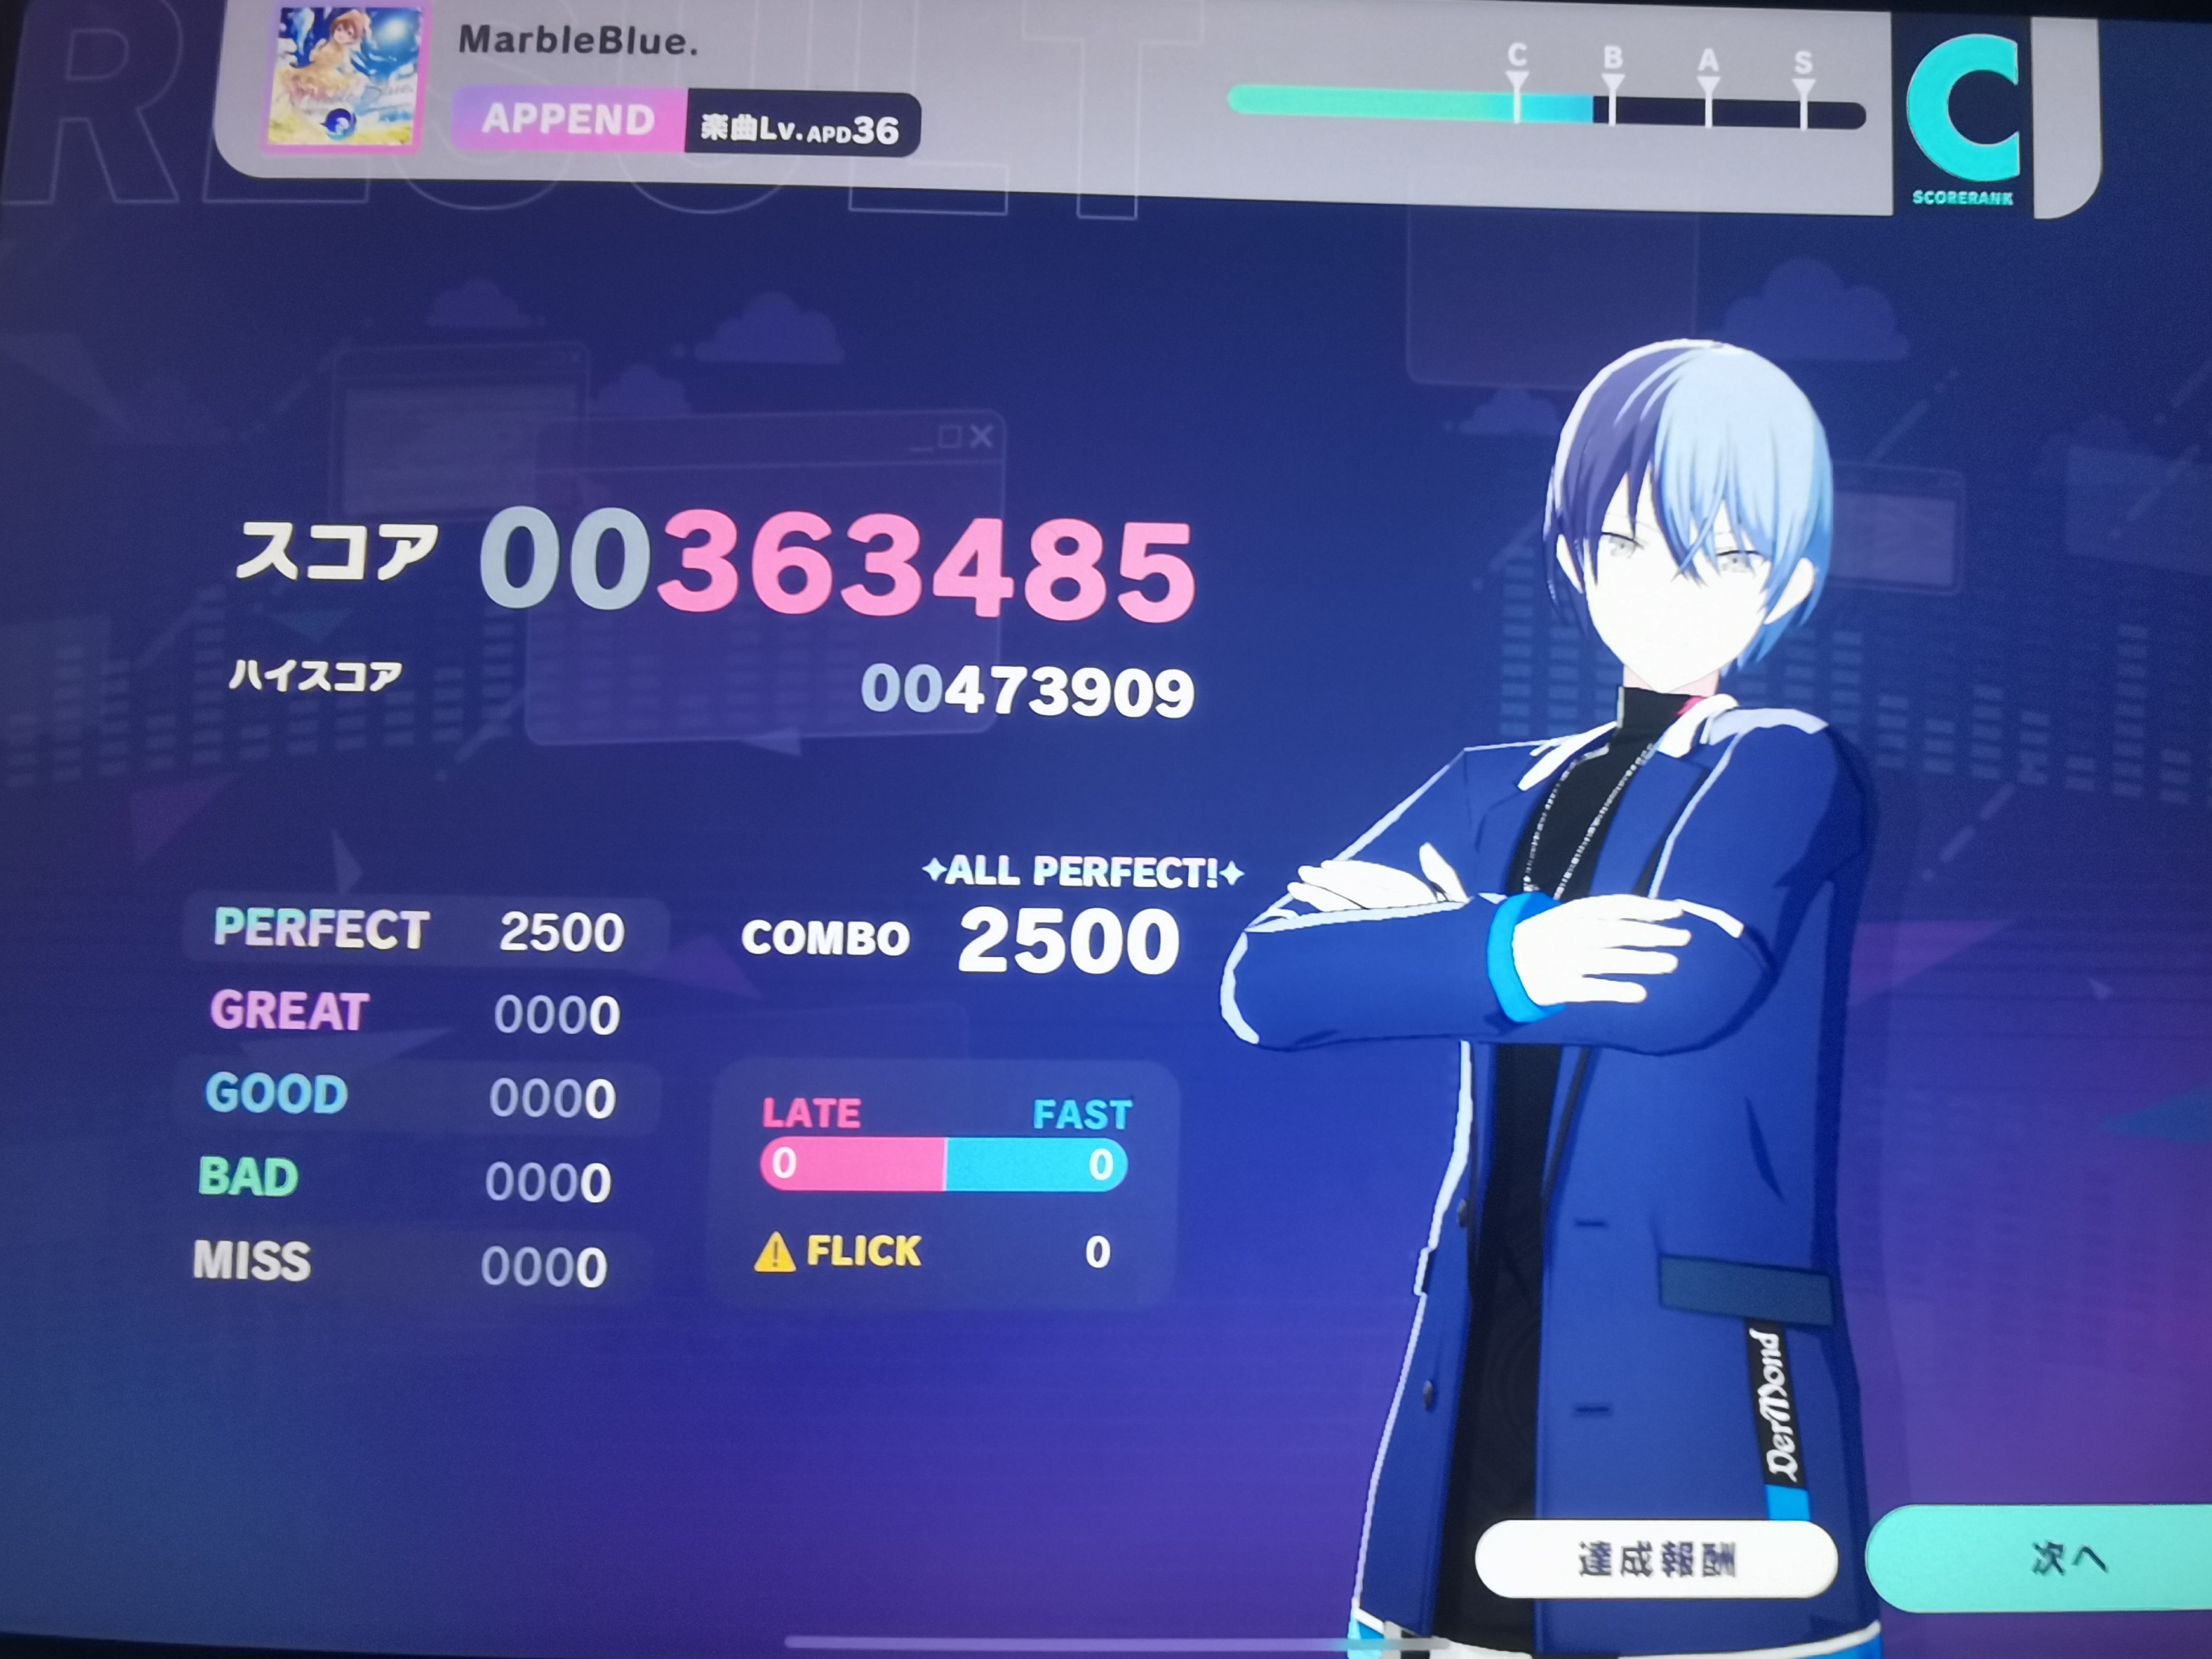 【Project Sekai】[全国首杀] MarbleBlue. [APPEND36] ALL PERFECT